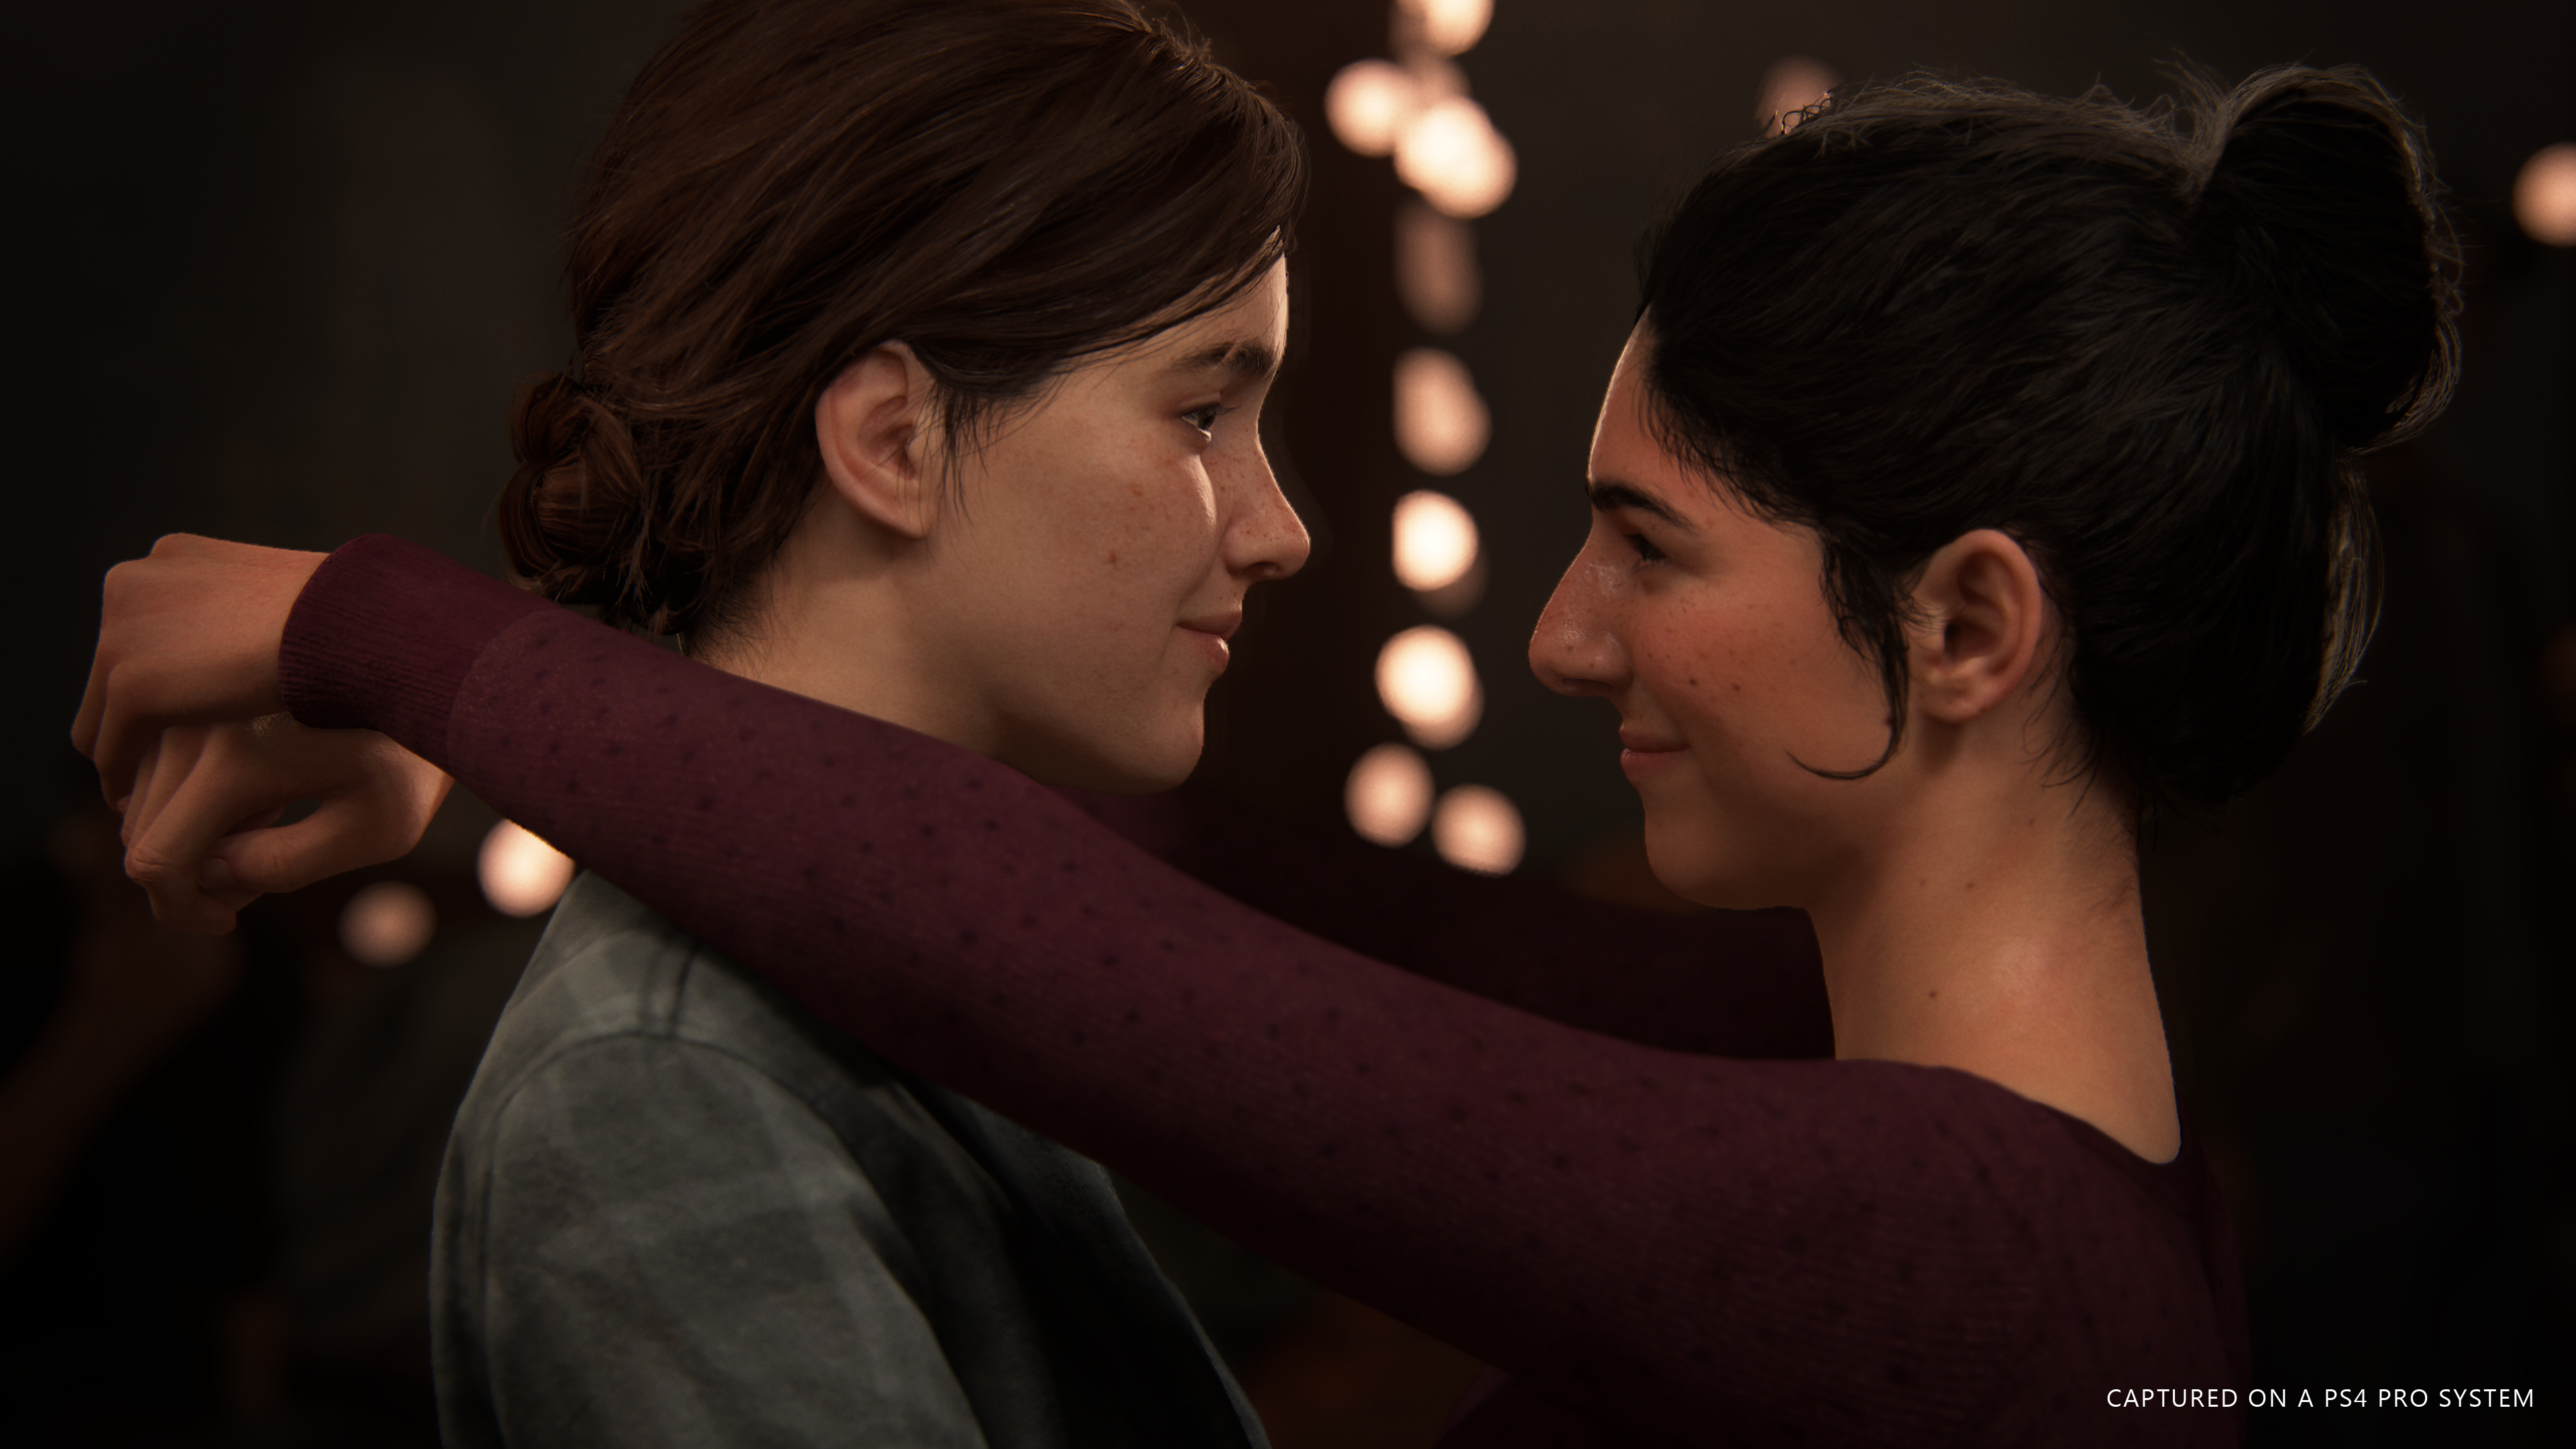 The Last of Us 2 Job Listing Asks for PC Experience, Has Some PlayStation  Fans in an Uproar